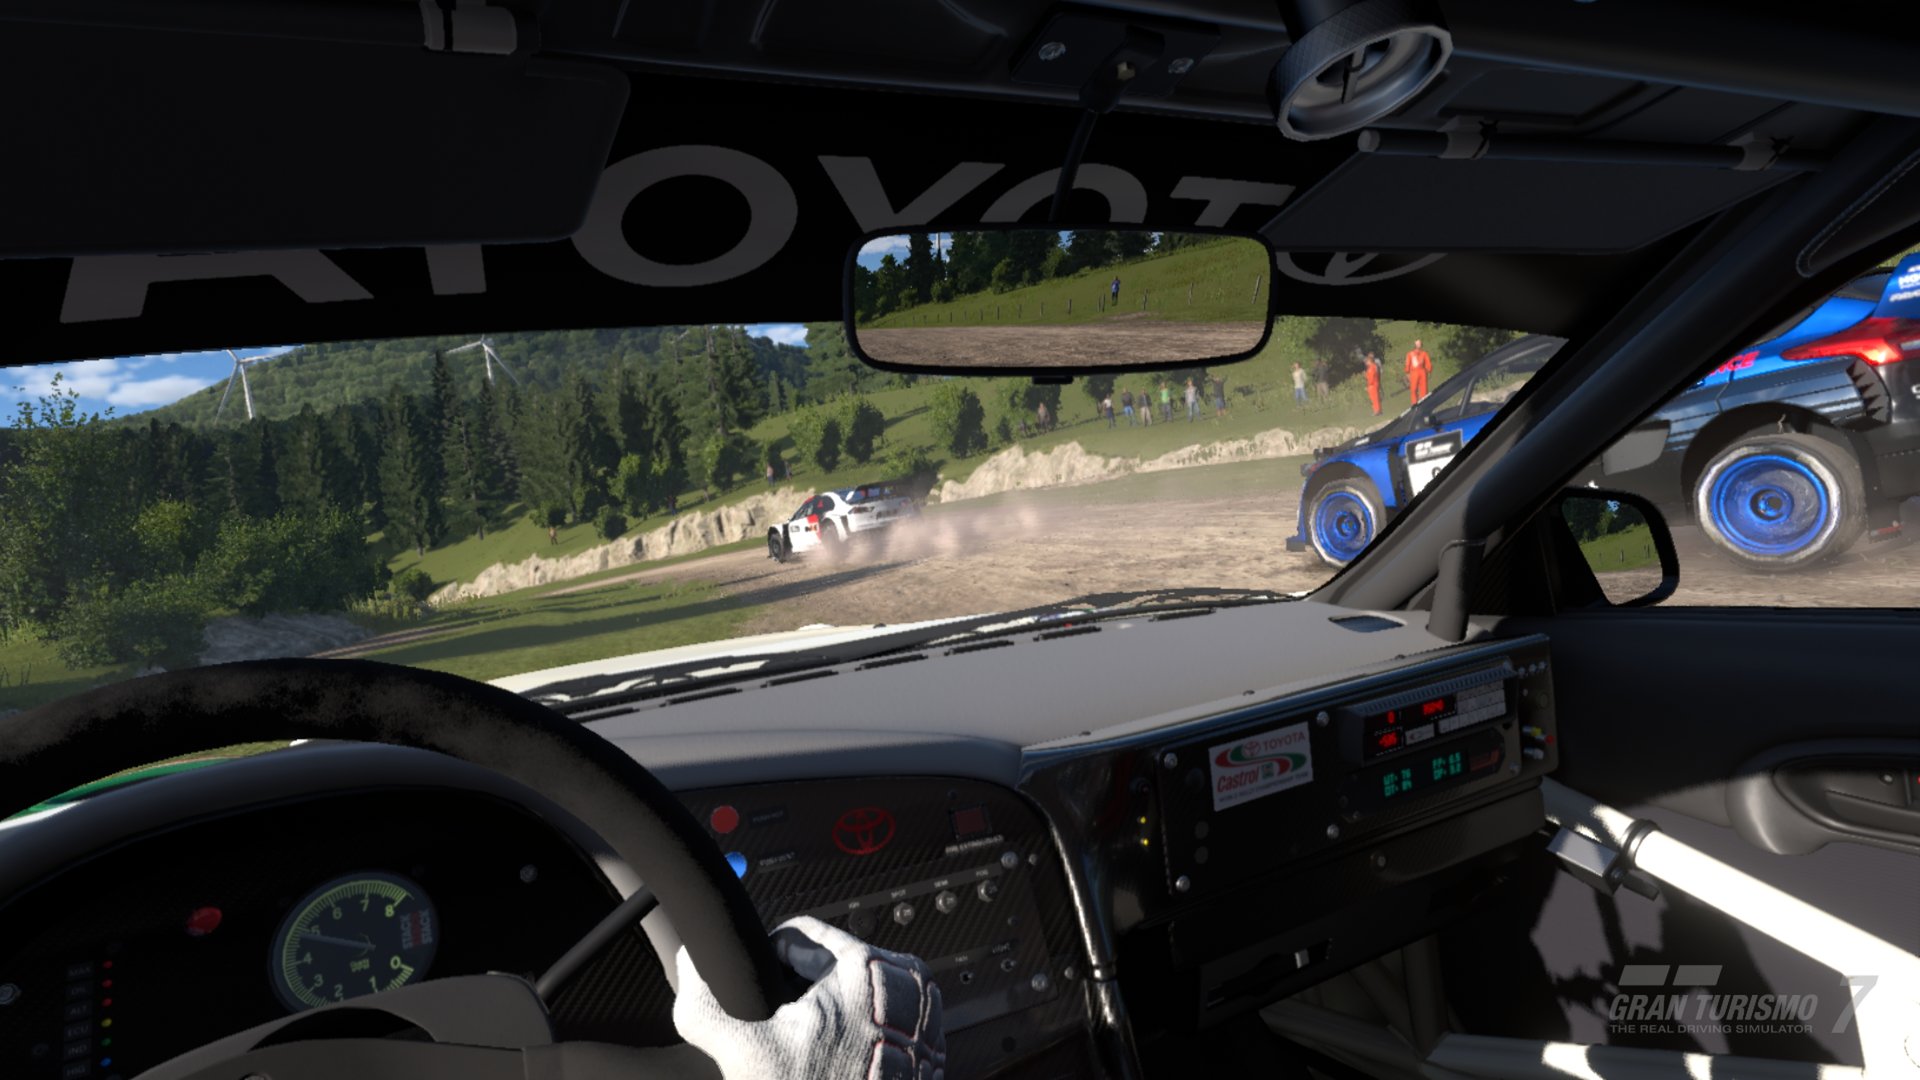 Gran Turismo 7 VR Coming To PSVR2 At Launch Through A Free Upgrade -  PlayStation Universe